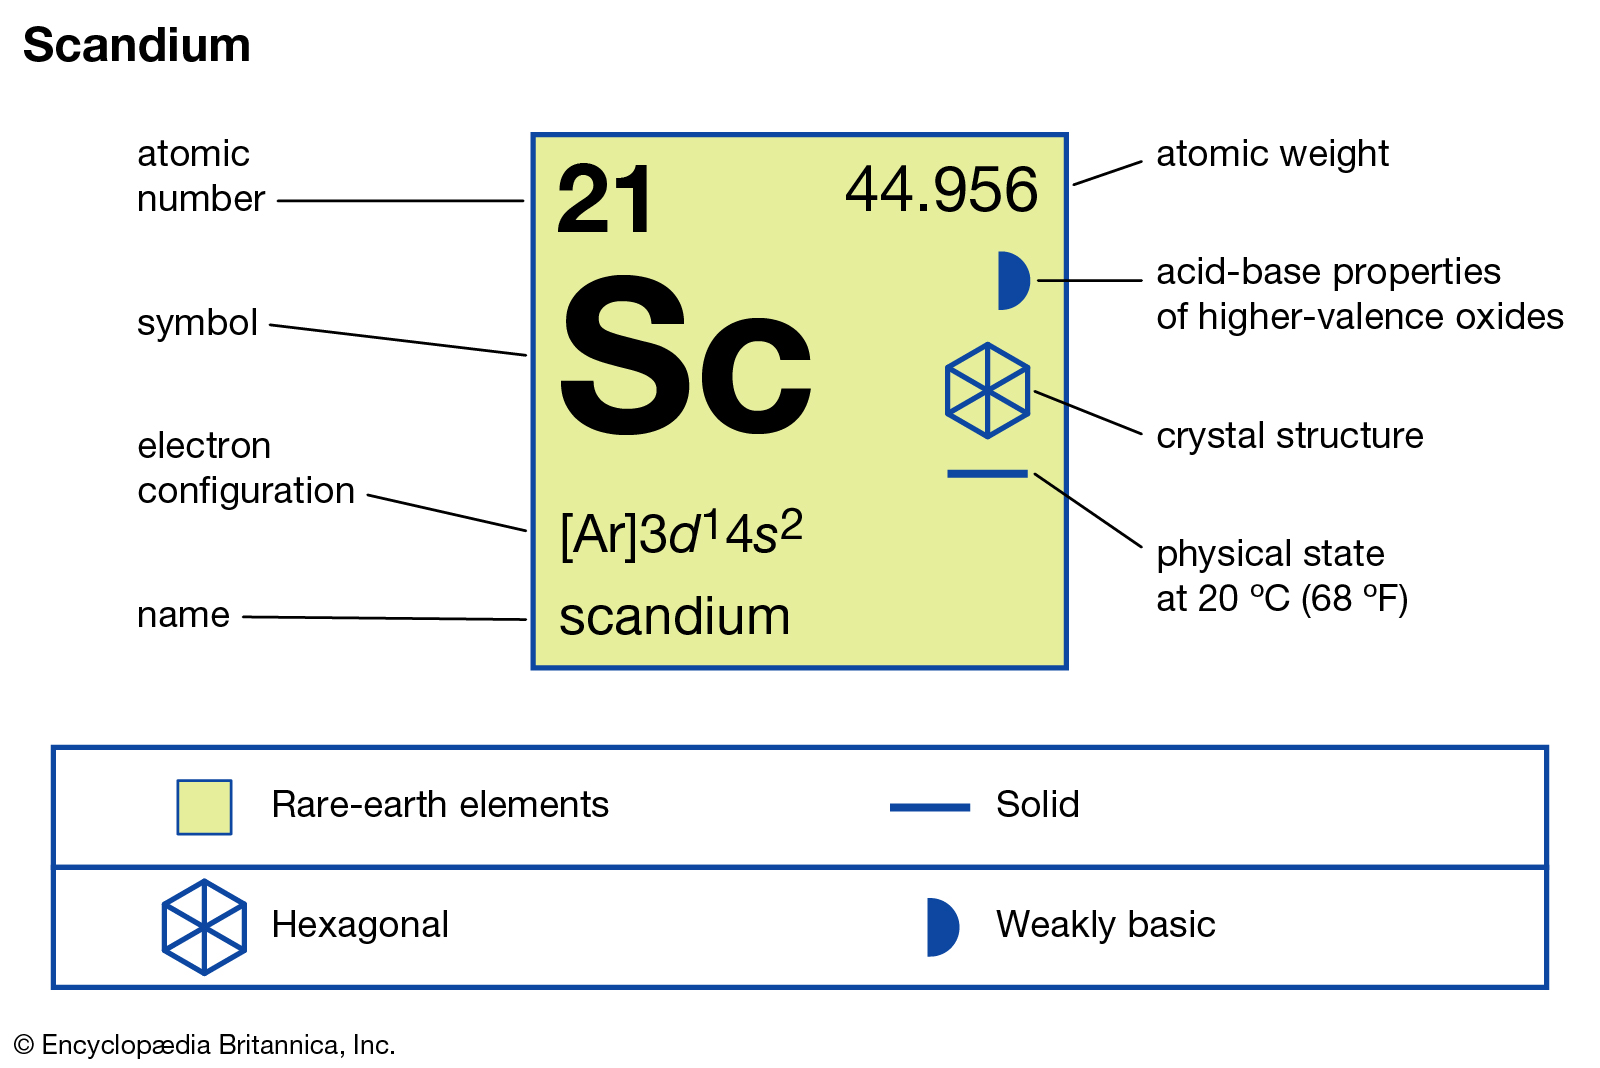 hinh-anh-interesting-facts-about-scandium-44-0